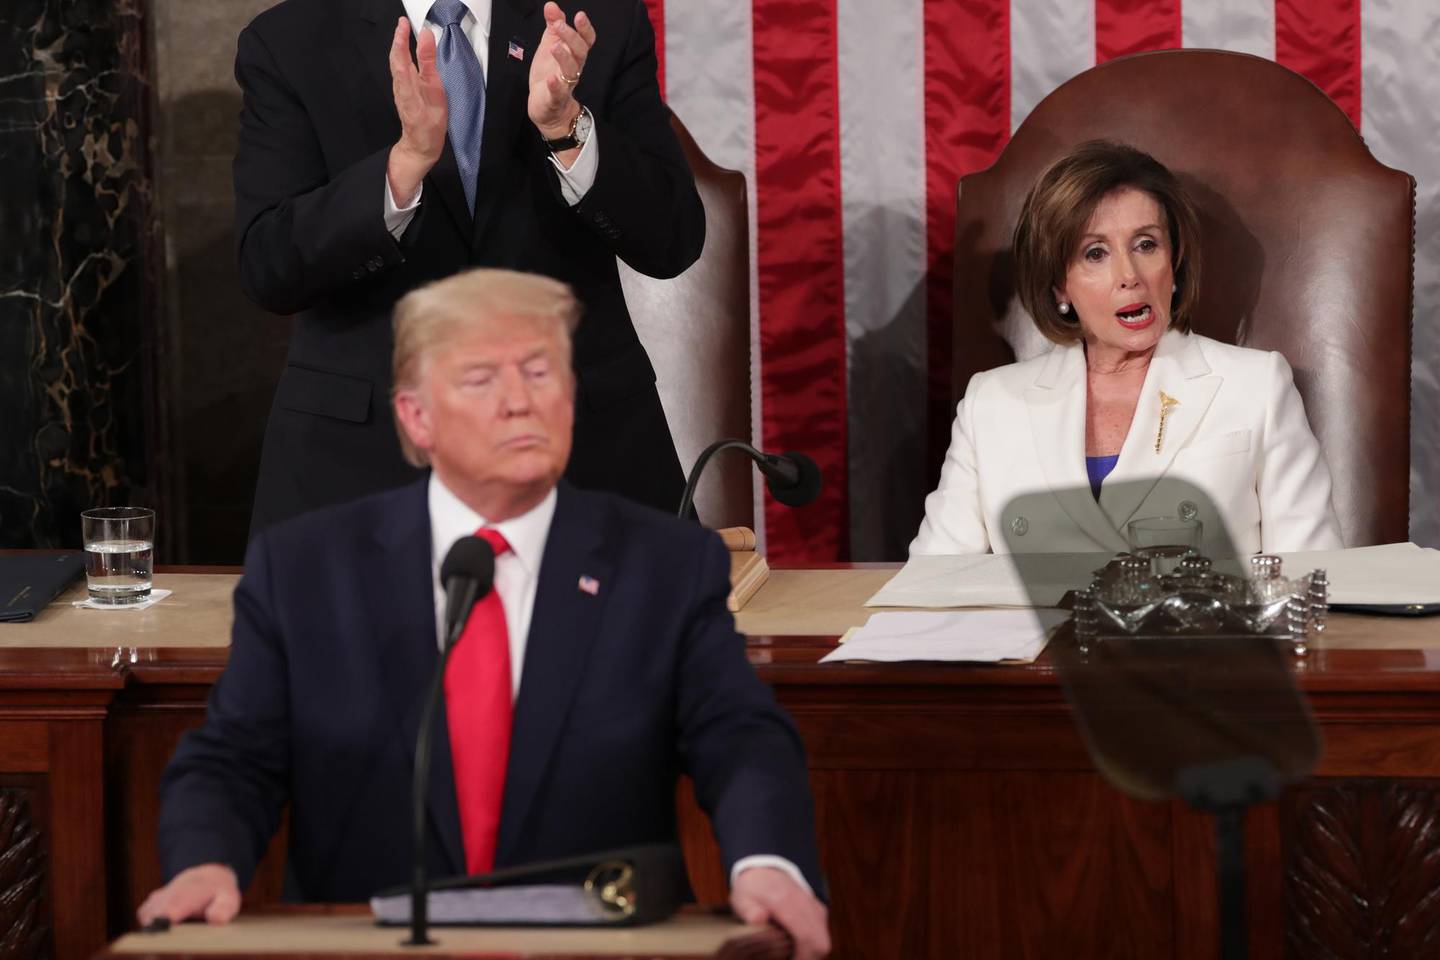 U.S. President Donald Trump speaks near Speaker of the House Nancy Pelosi (D-CA) during his State of the Union address to a joint session of the U.S. Congress in the House Chamber of the U.S. Capitol in Washington, U.S. February 4, 2020. REUTERS/Jonathan Ernst